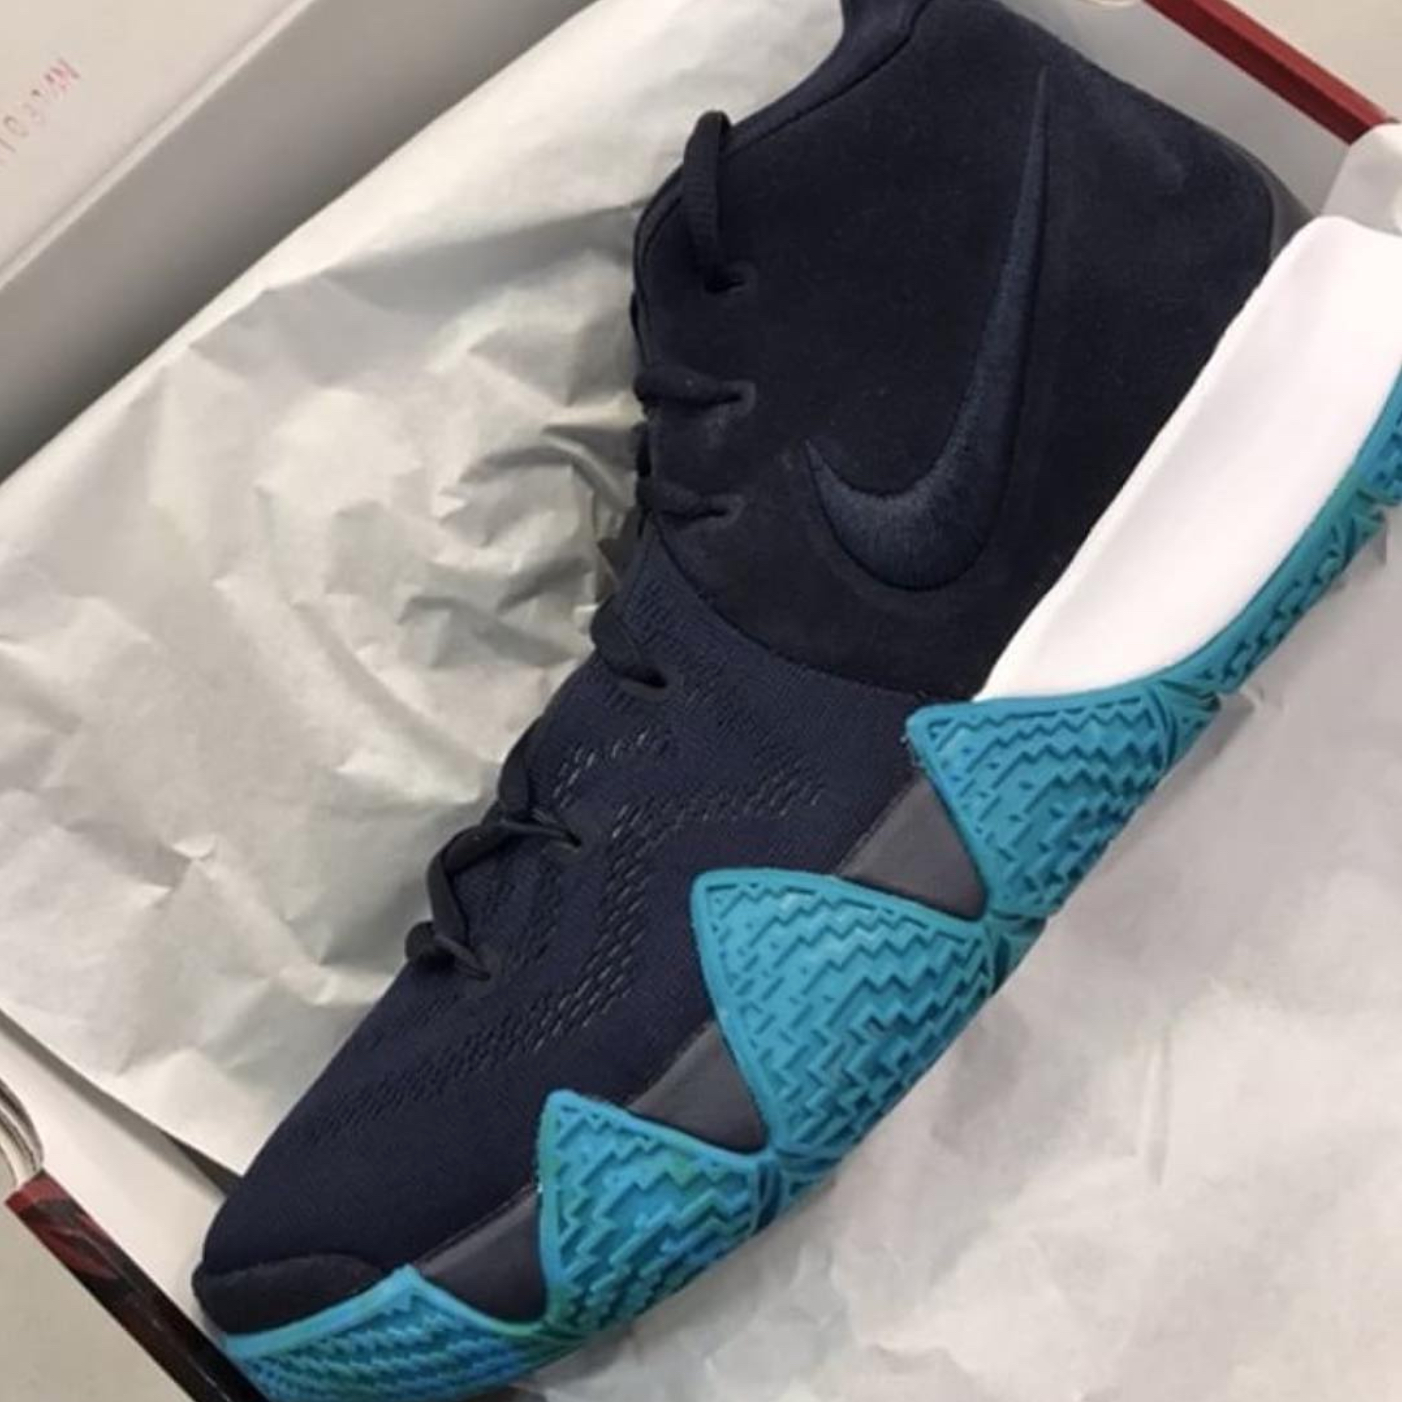 kyrie 4 blue and black